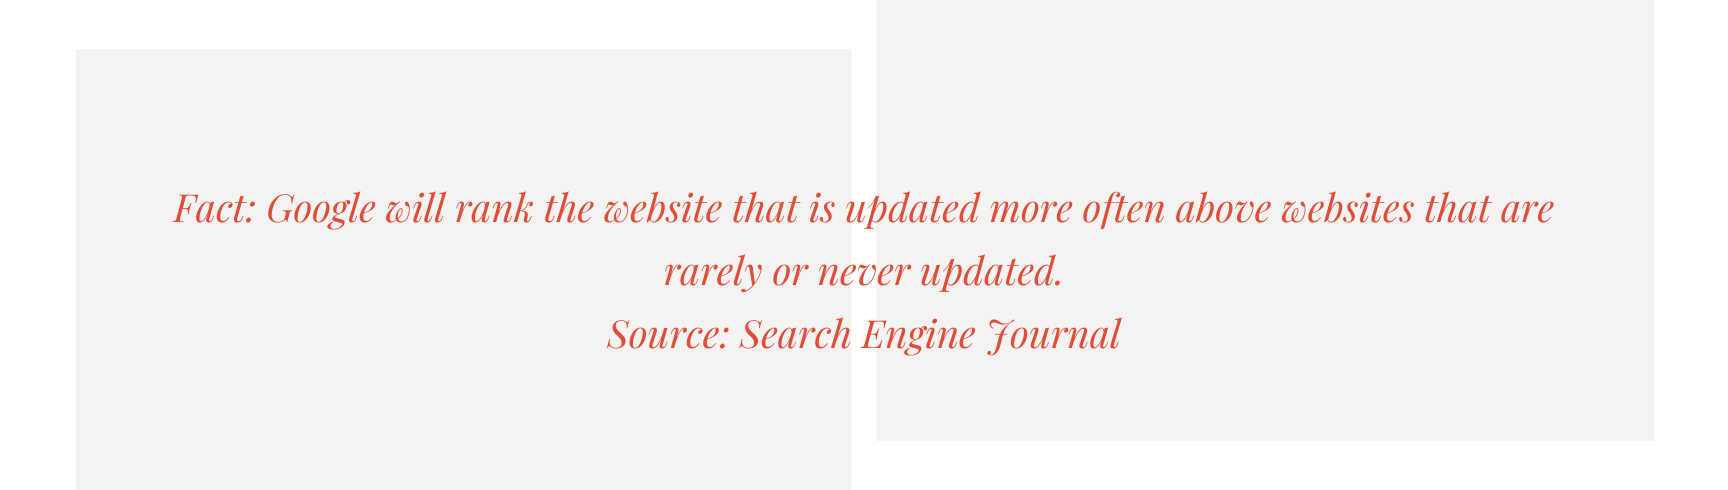 Search Engine Journal fact on updating your website often